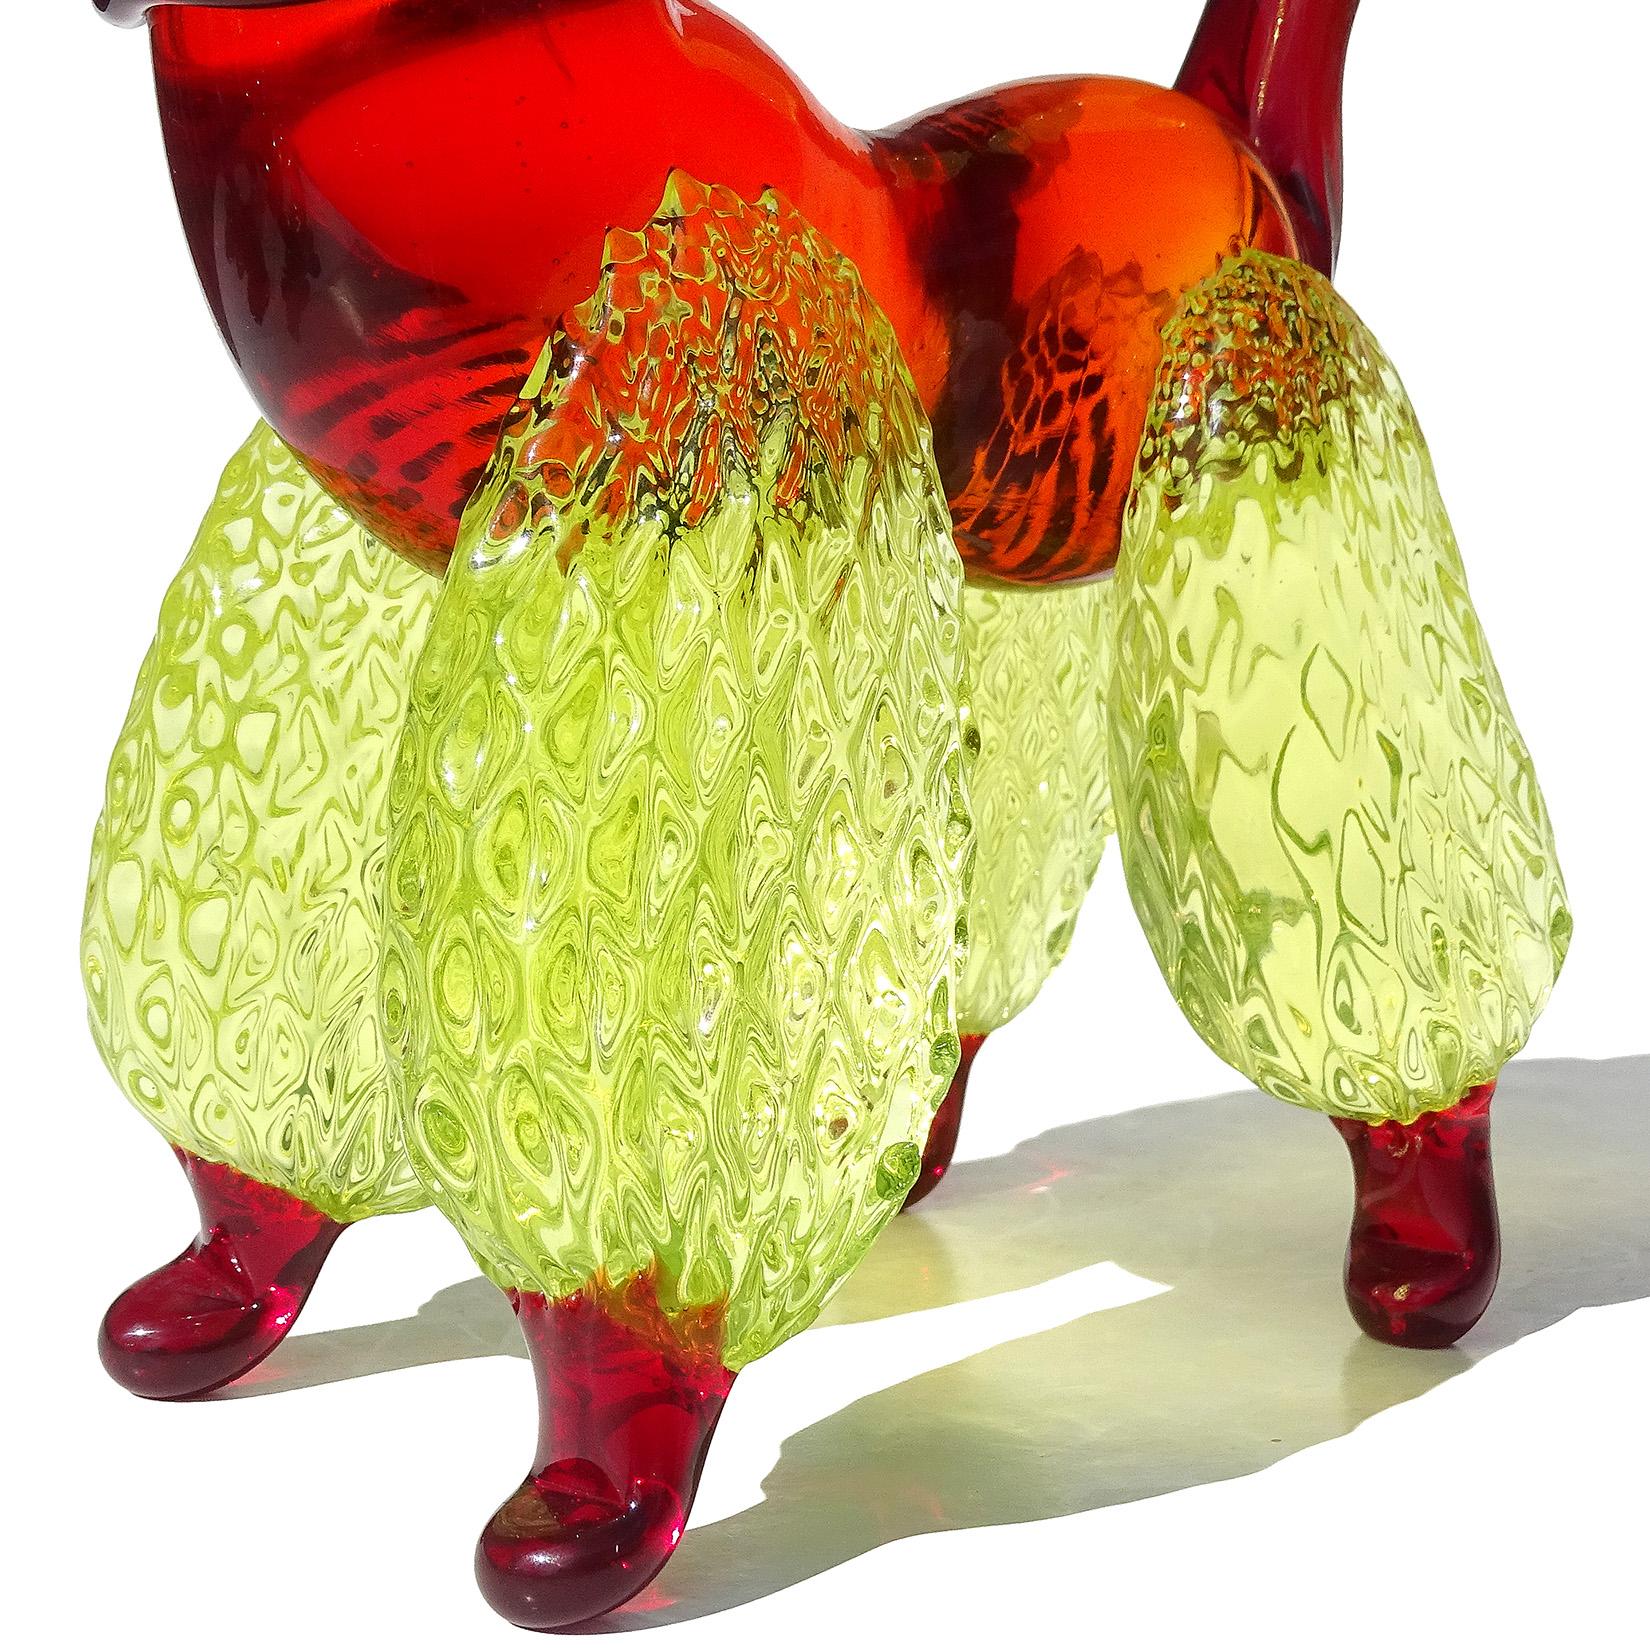 Hand-Crafted Murano Red Quilted Uranium Fur Italian Art Glass Puppy Dog Poodle Sculpture